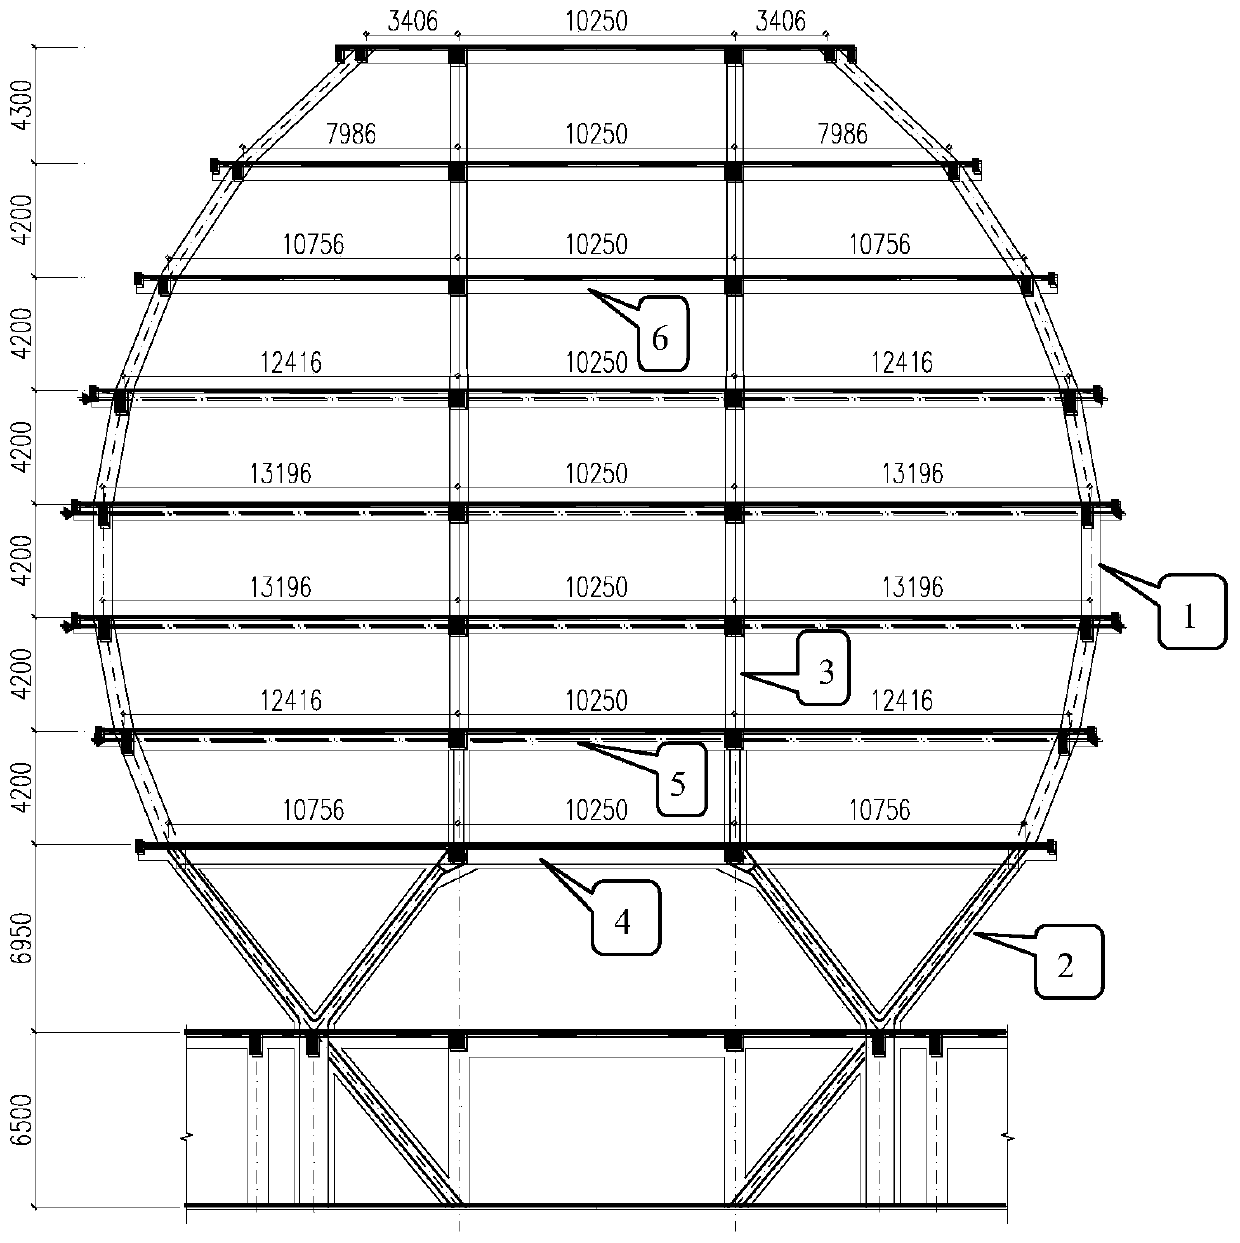 A Design Method Based on Continuous Direction-changing Reinforced Concrete Column Structural System